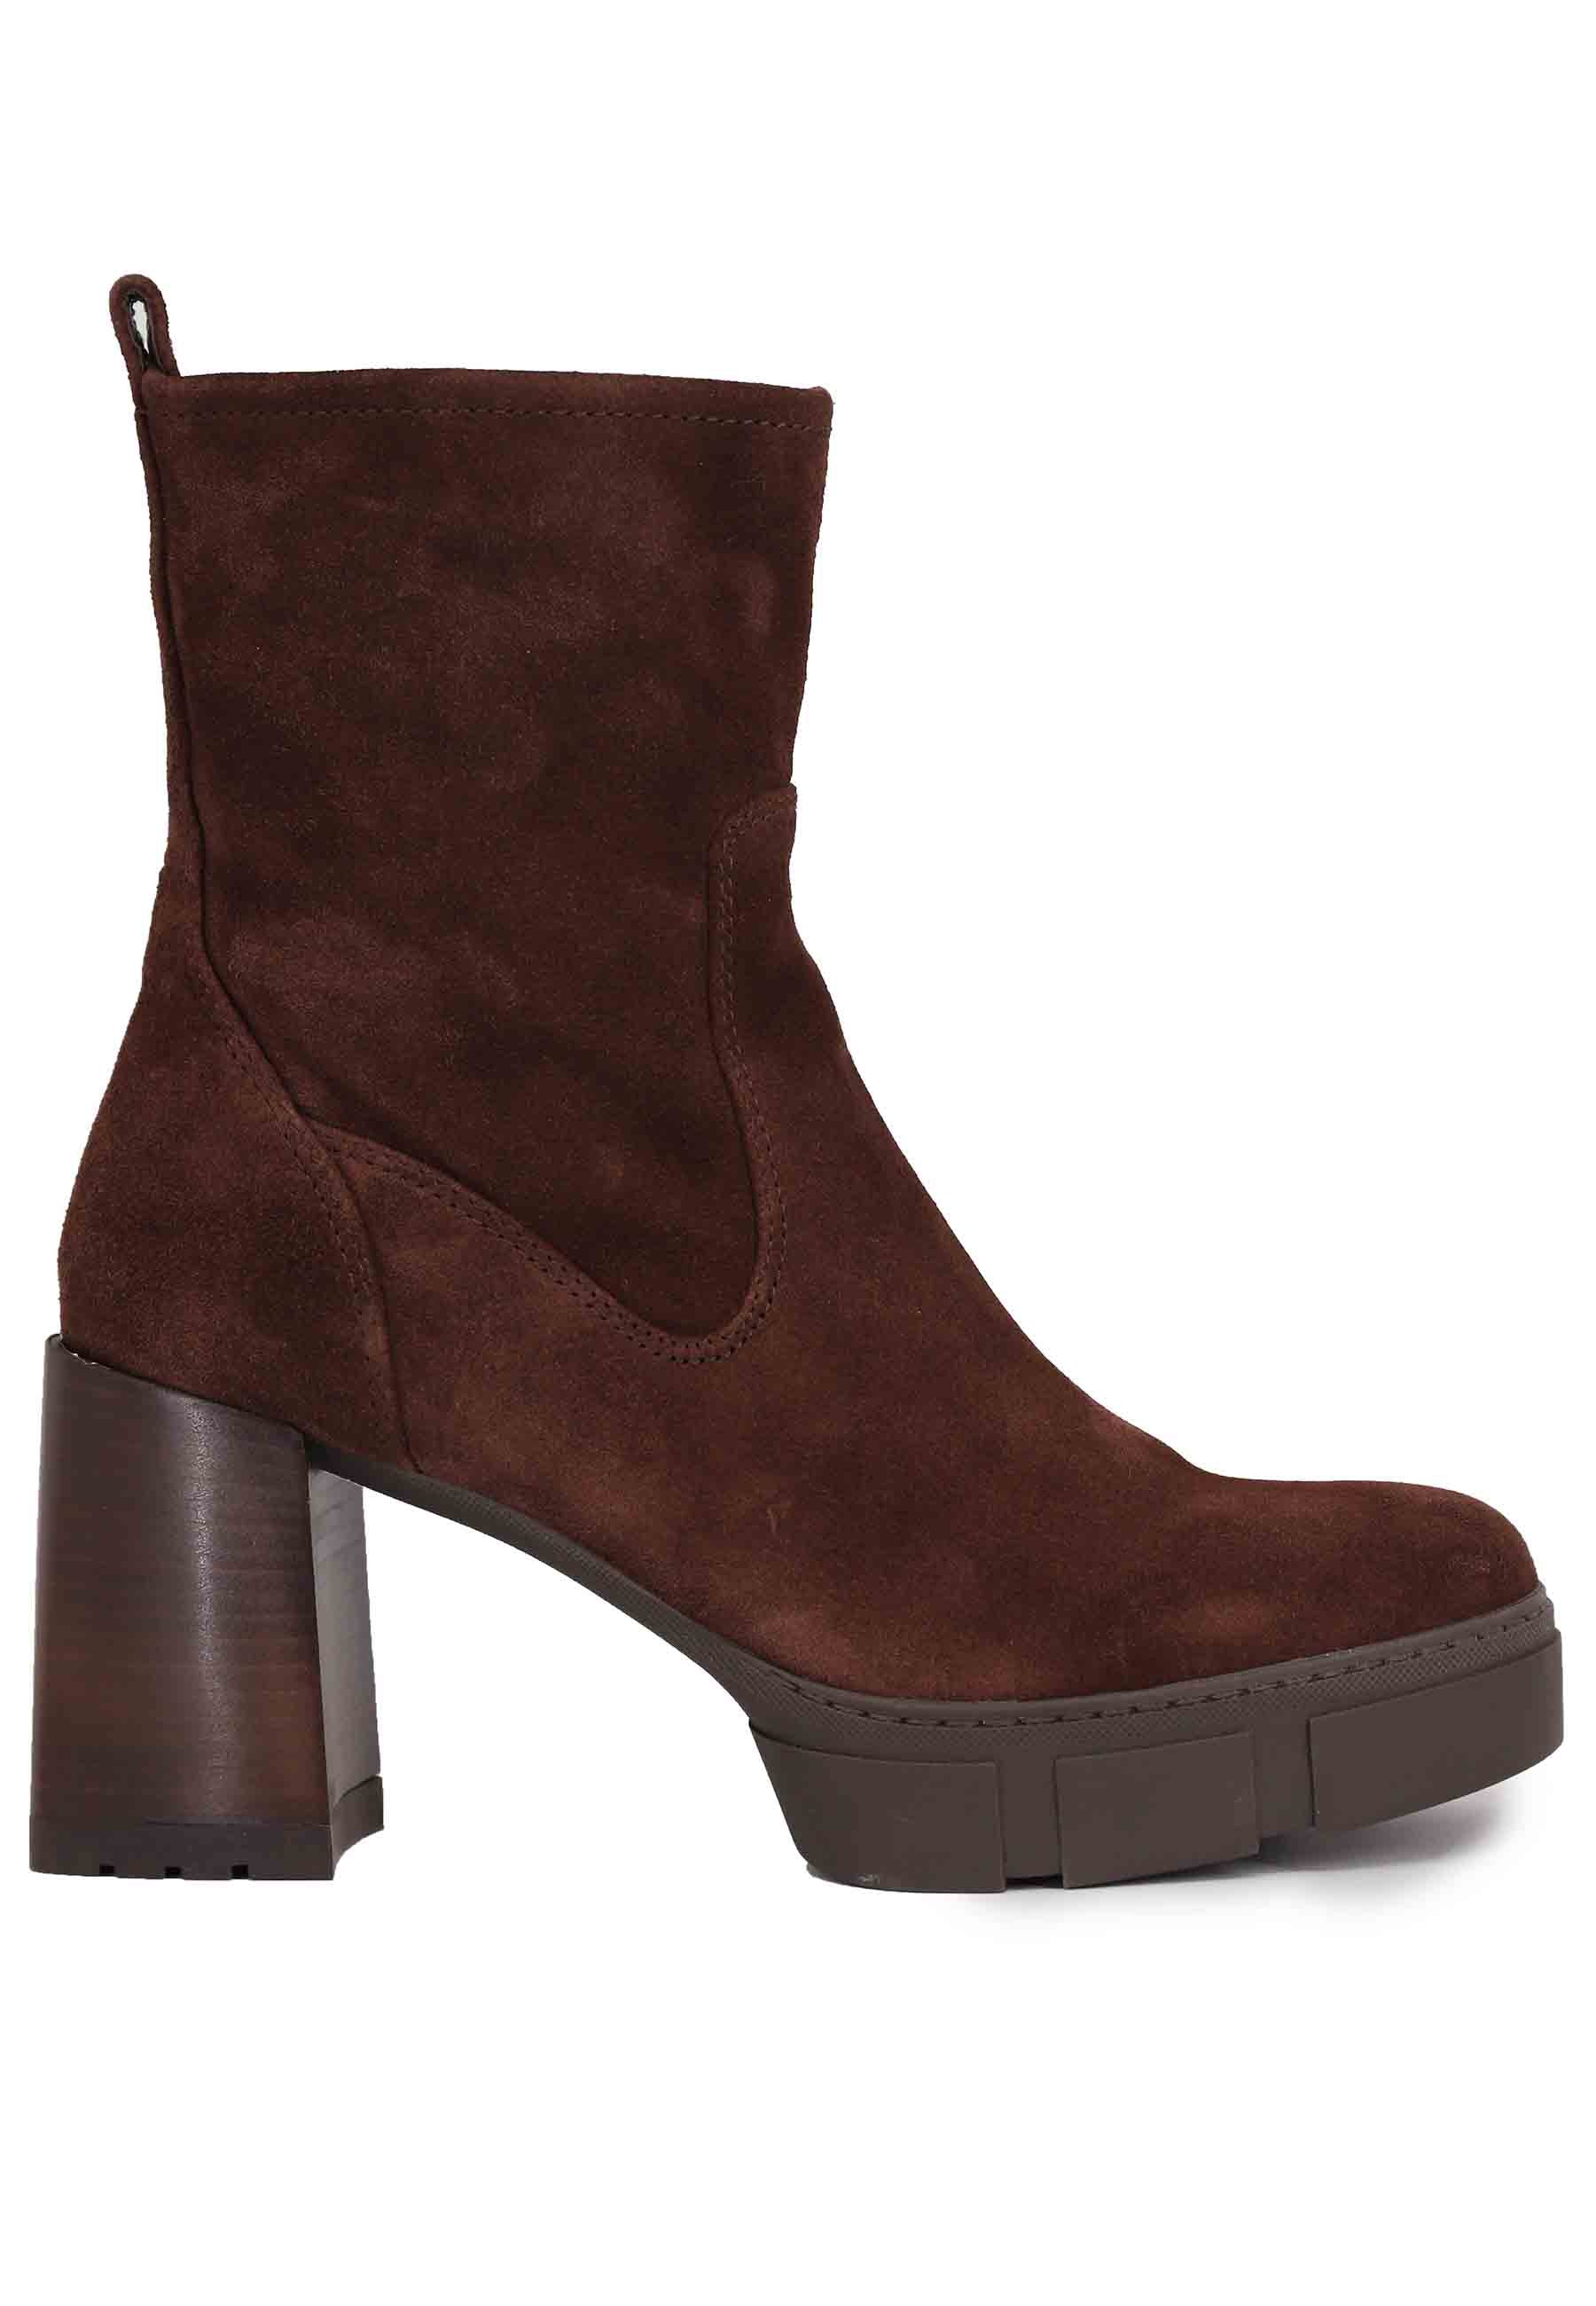 Women's ankle boots in dark brown suede with high heel and platform